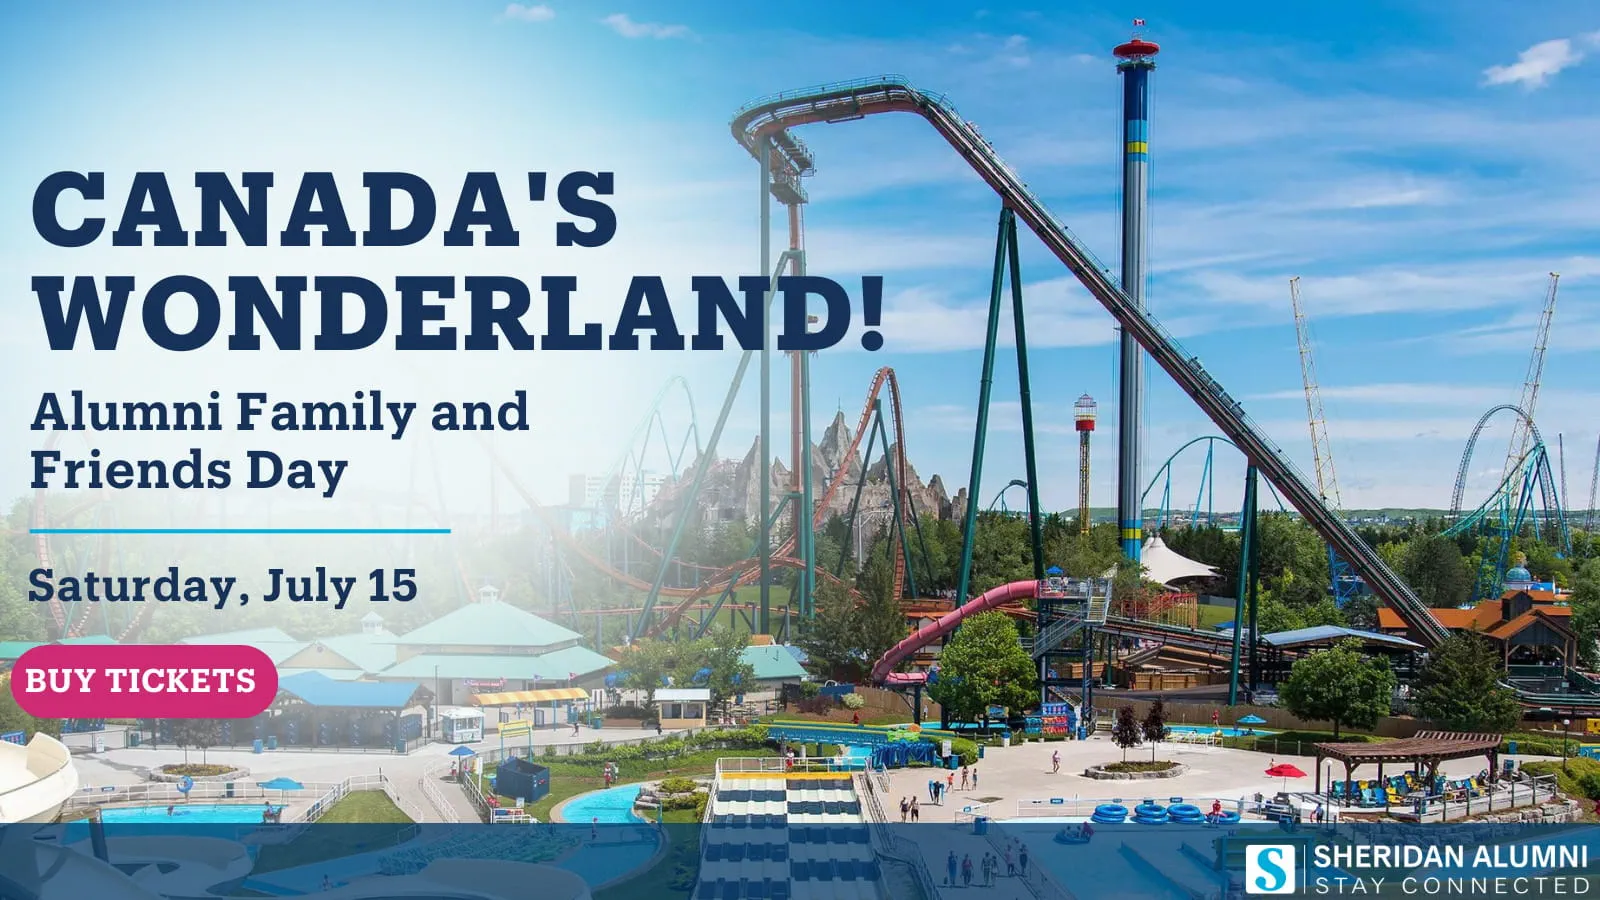 Canada's Wonderland! Alumni Family and Friends Day | Saturday, July 15 | Sheridan Alumni | Stay Connected